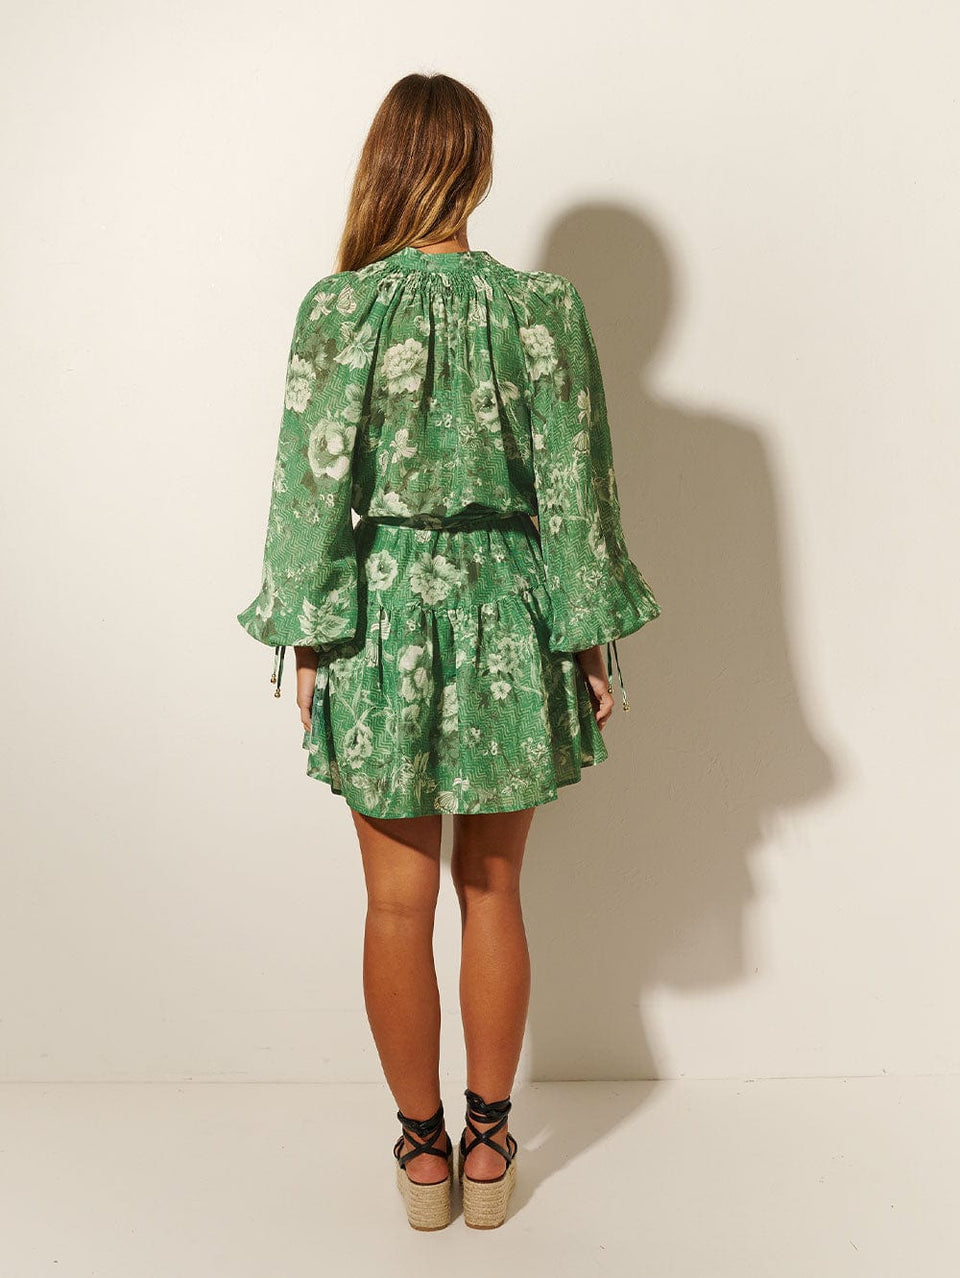 Studio model wears KIVARI Khalo Mini Dress: A green floral dress featuring a button-through bodice, full-length blouson sleeves and a tiered skirt with belt. 